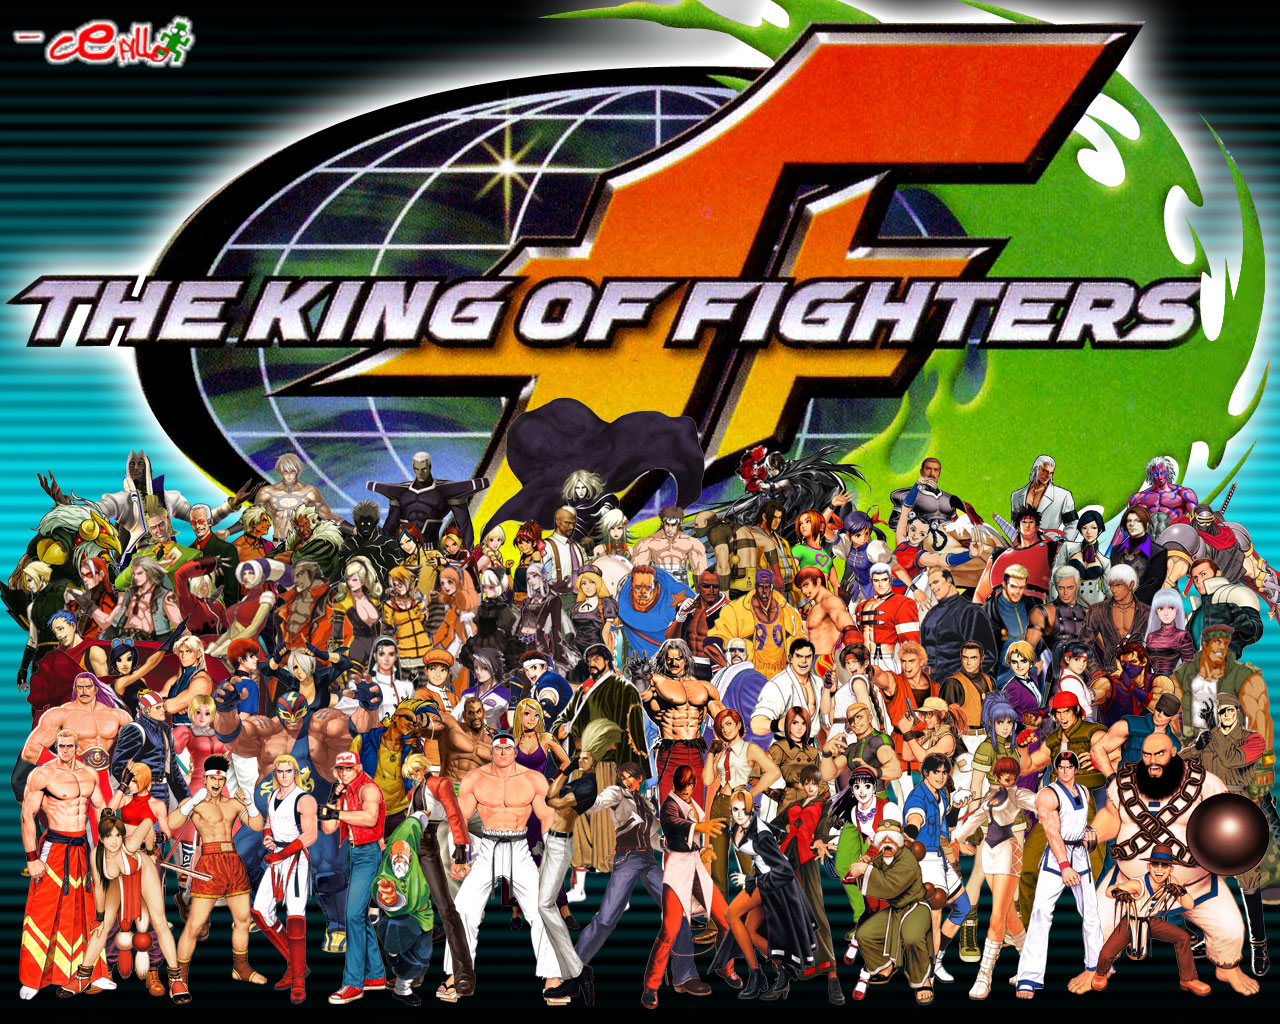  King Of Fighters Wallpaper by Cepillo16jpg   The King of Fighters 1280x1024